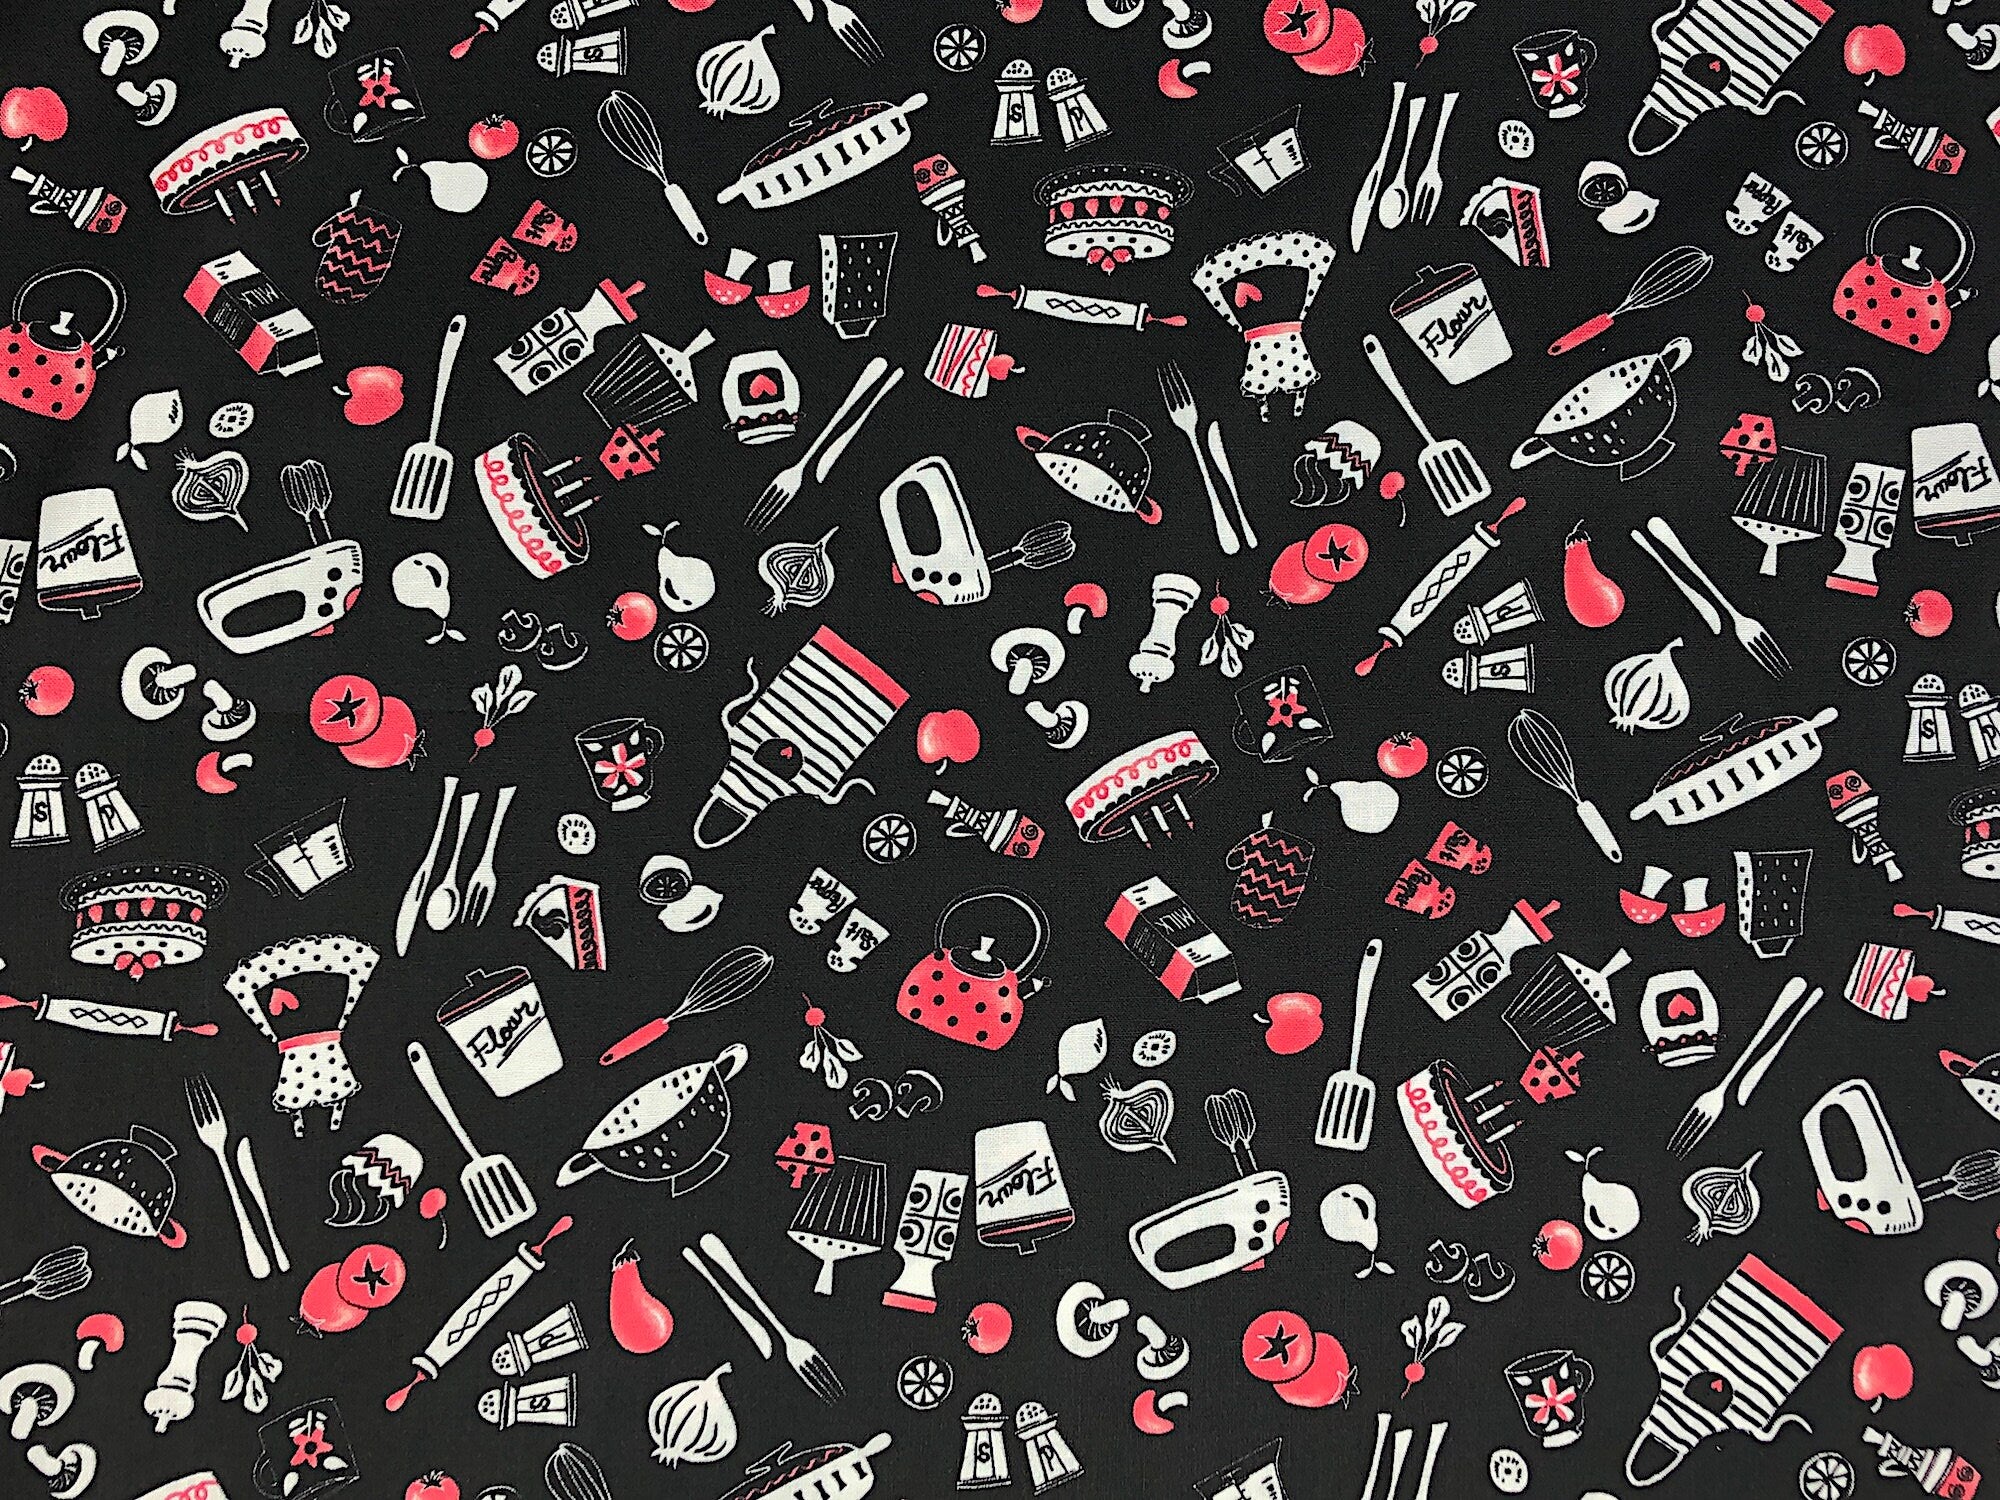 This fabric is called Black in the kitchen utensils and is covered with aprons, spatulas, cakes, rolling pins, graters, whisks, apples, mushrooms and more. The background is black.